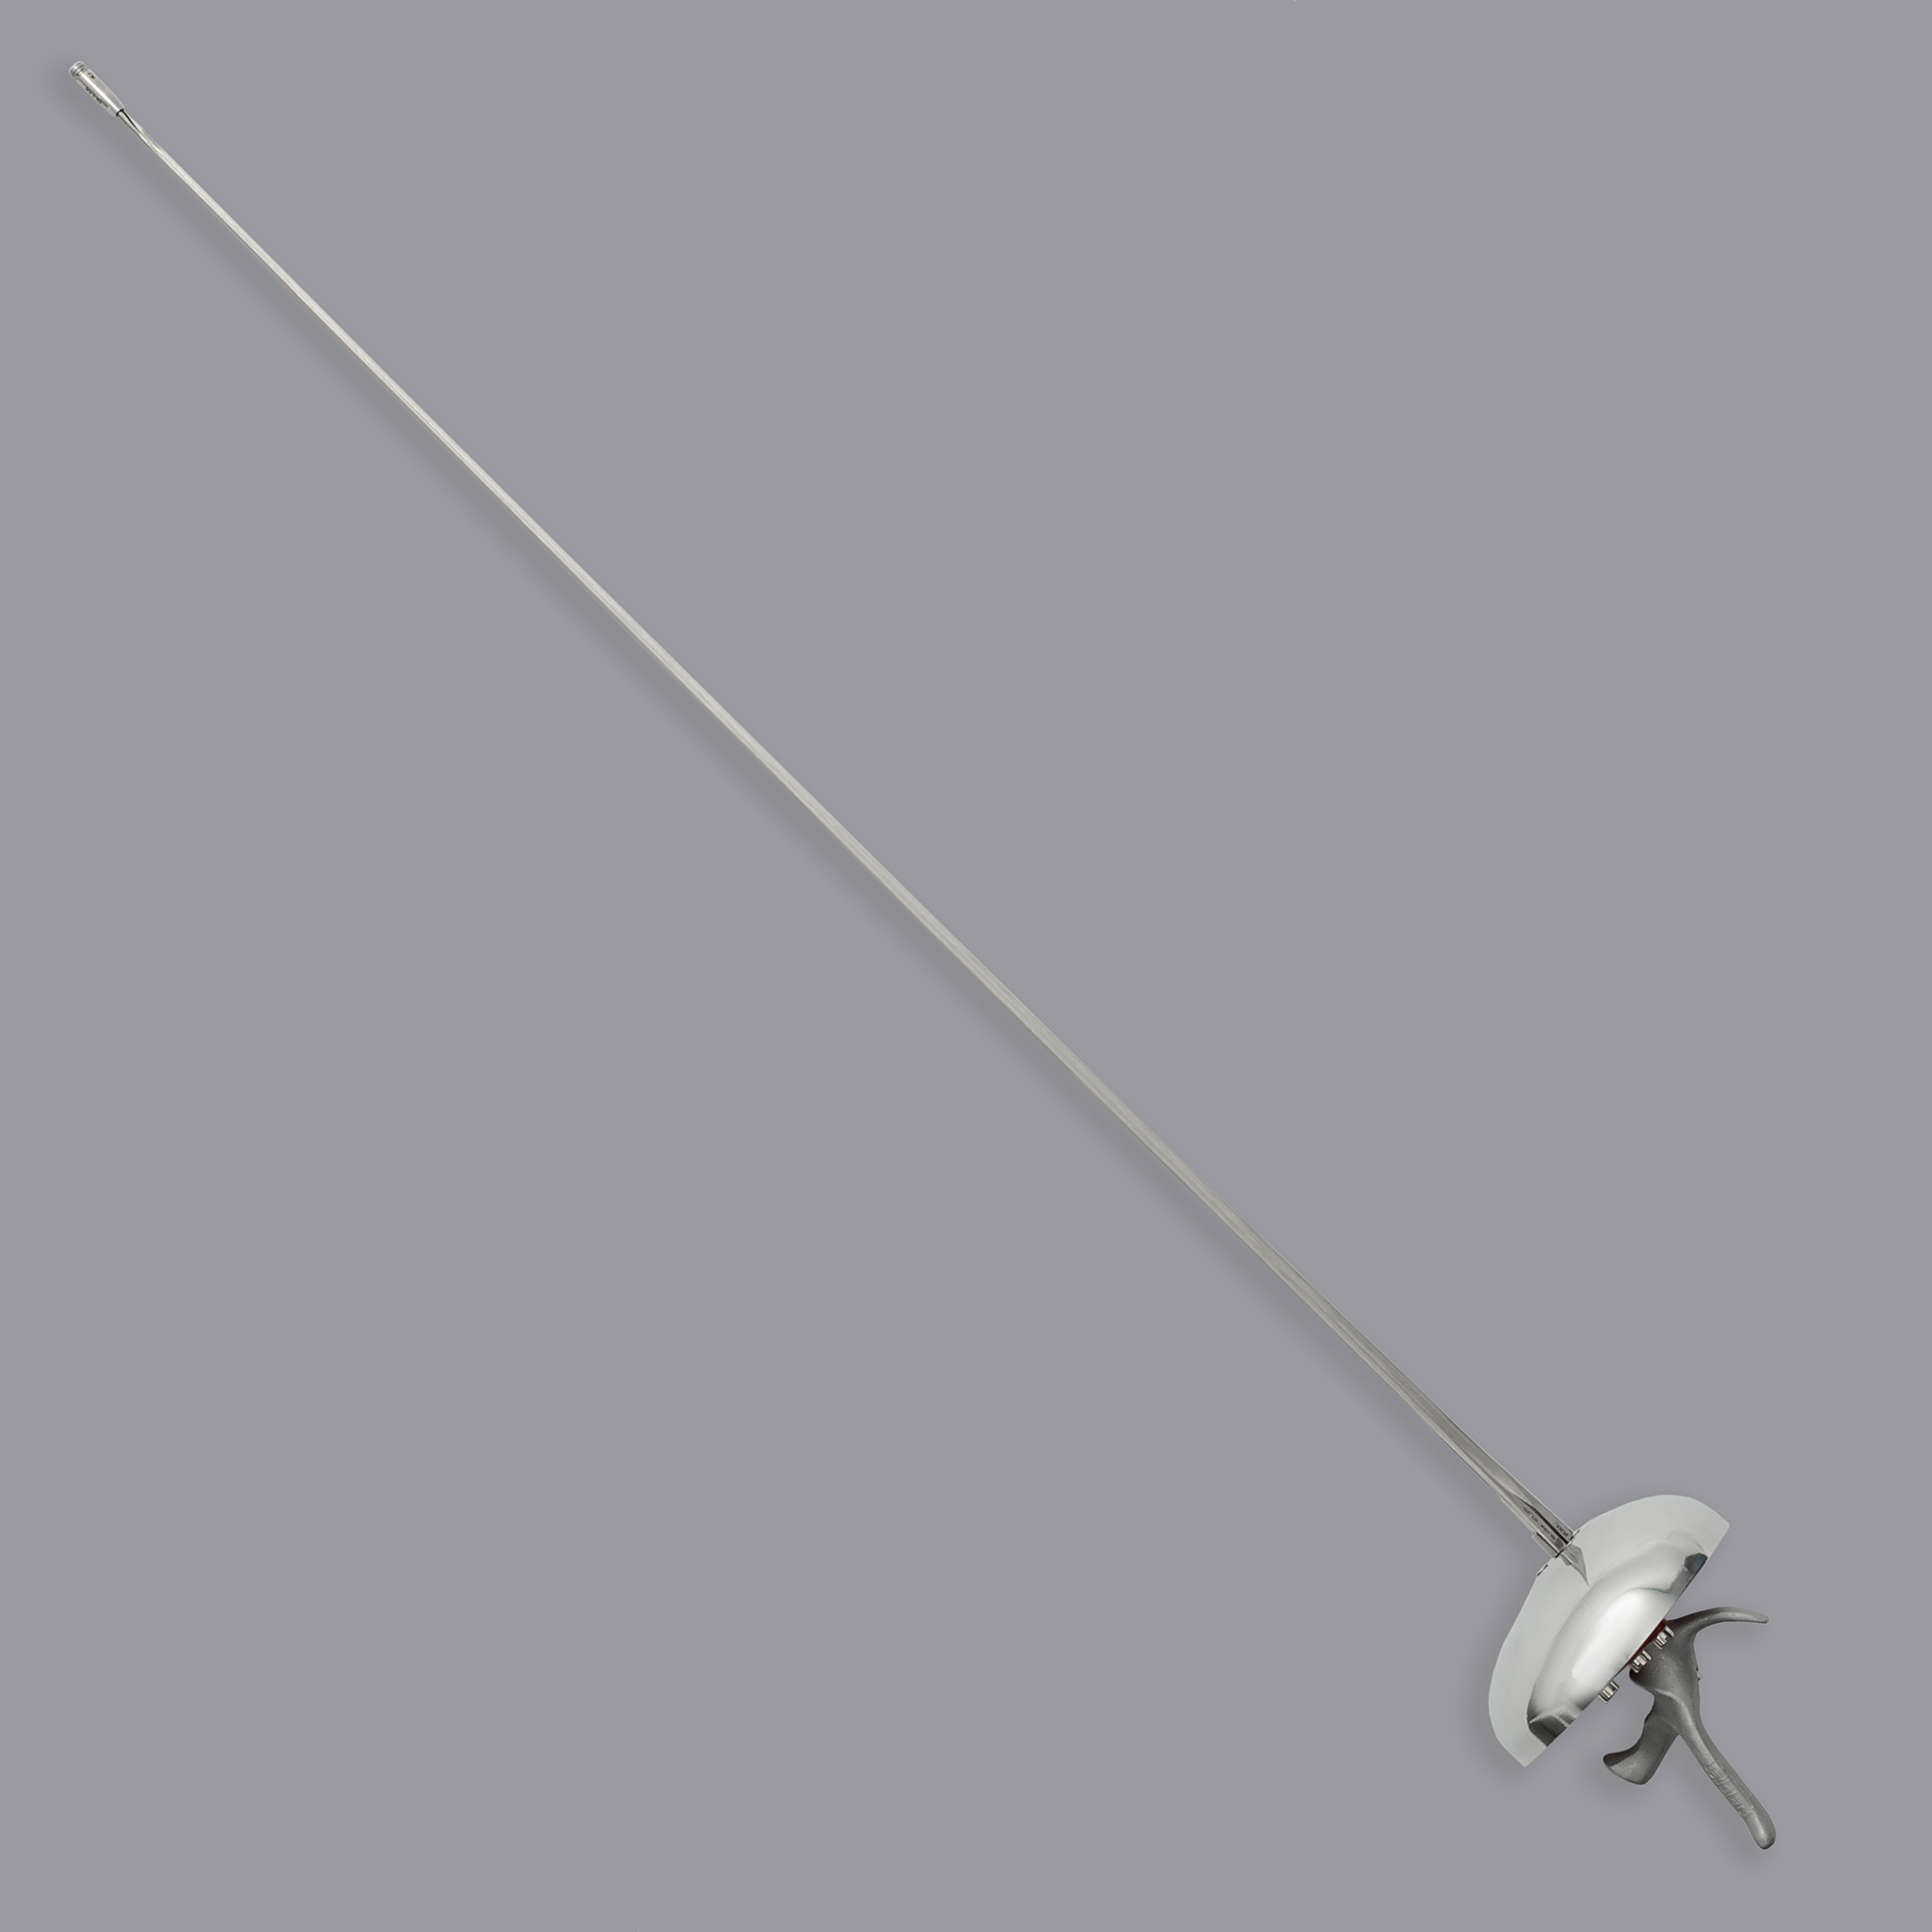 Epee FIE-Maragen StM Elite + (components made in Germany)